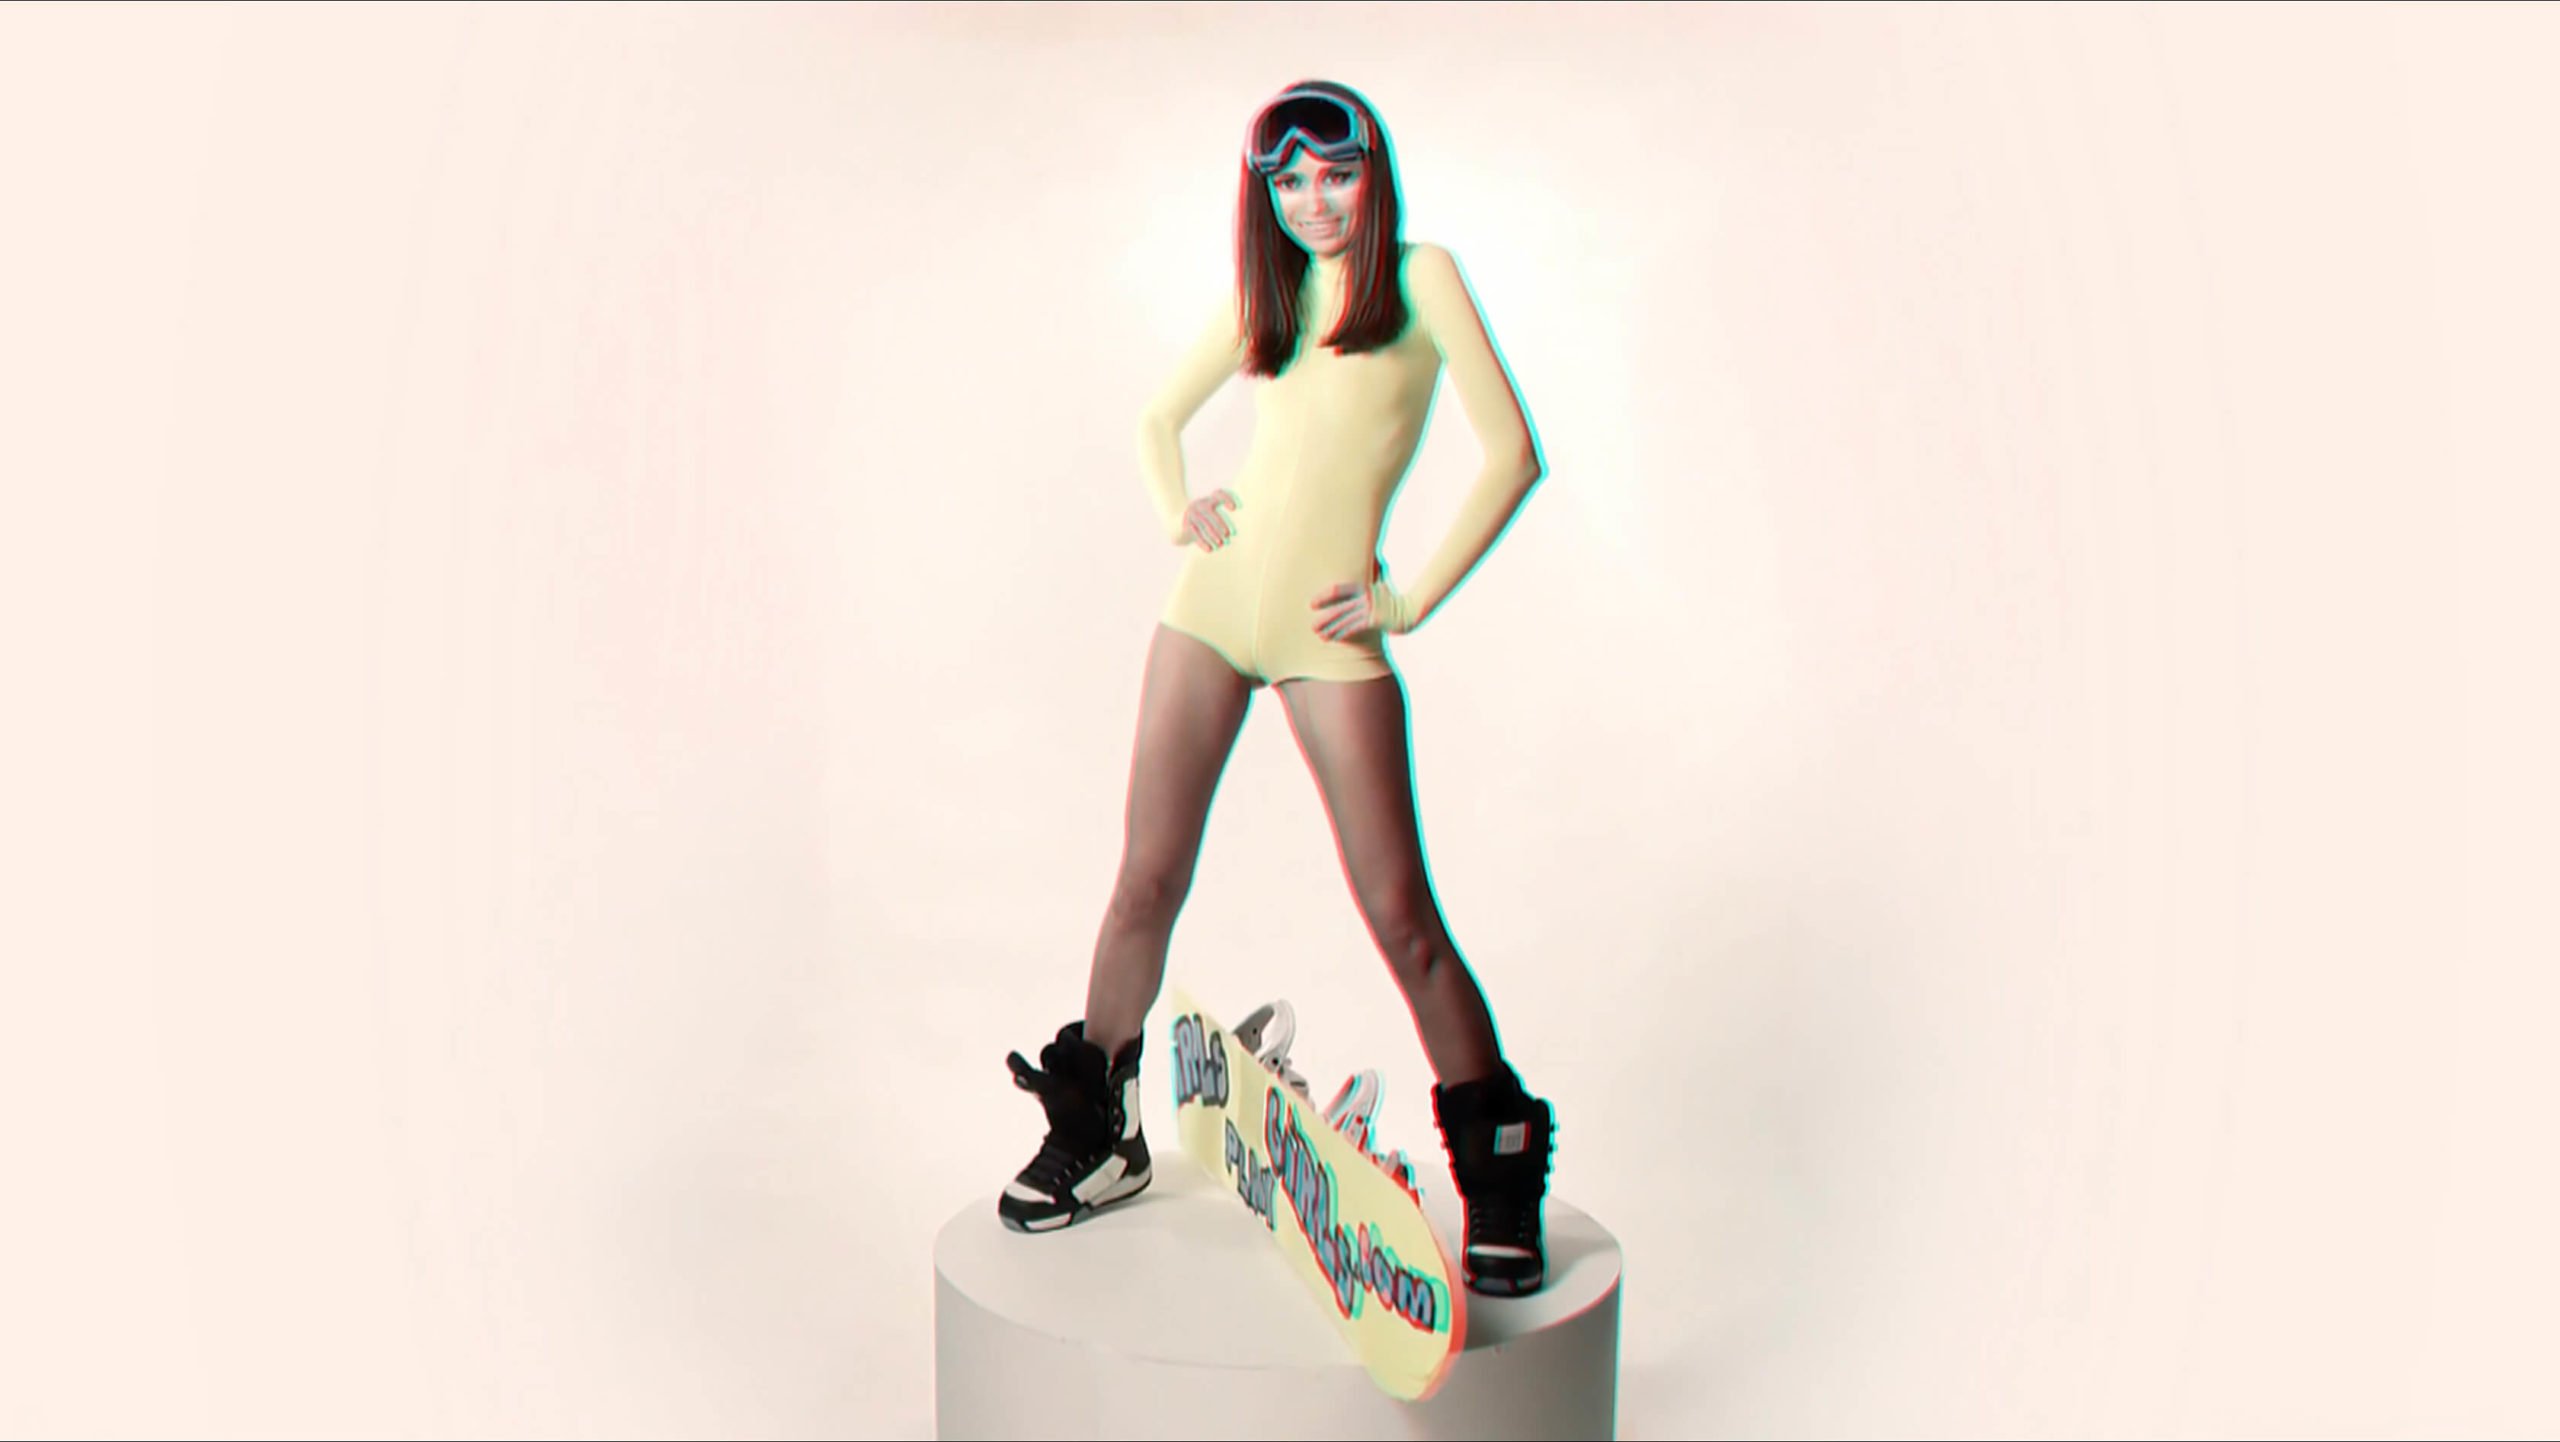 Snowboard girl (3D stereoscopic anaglyph)